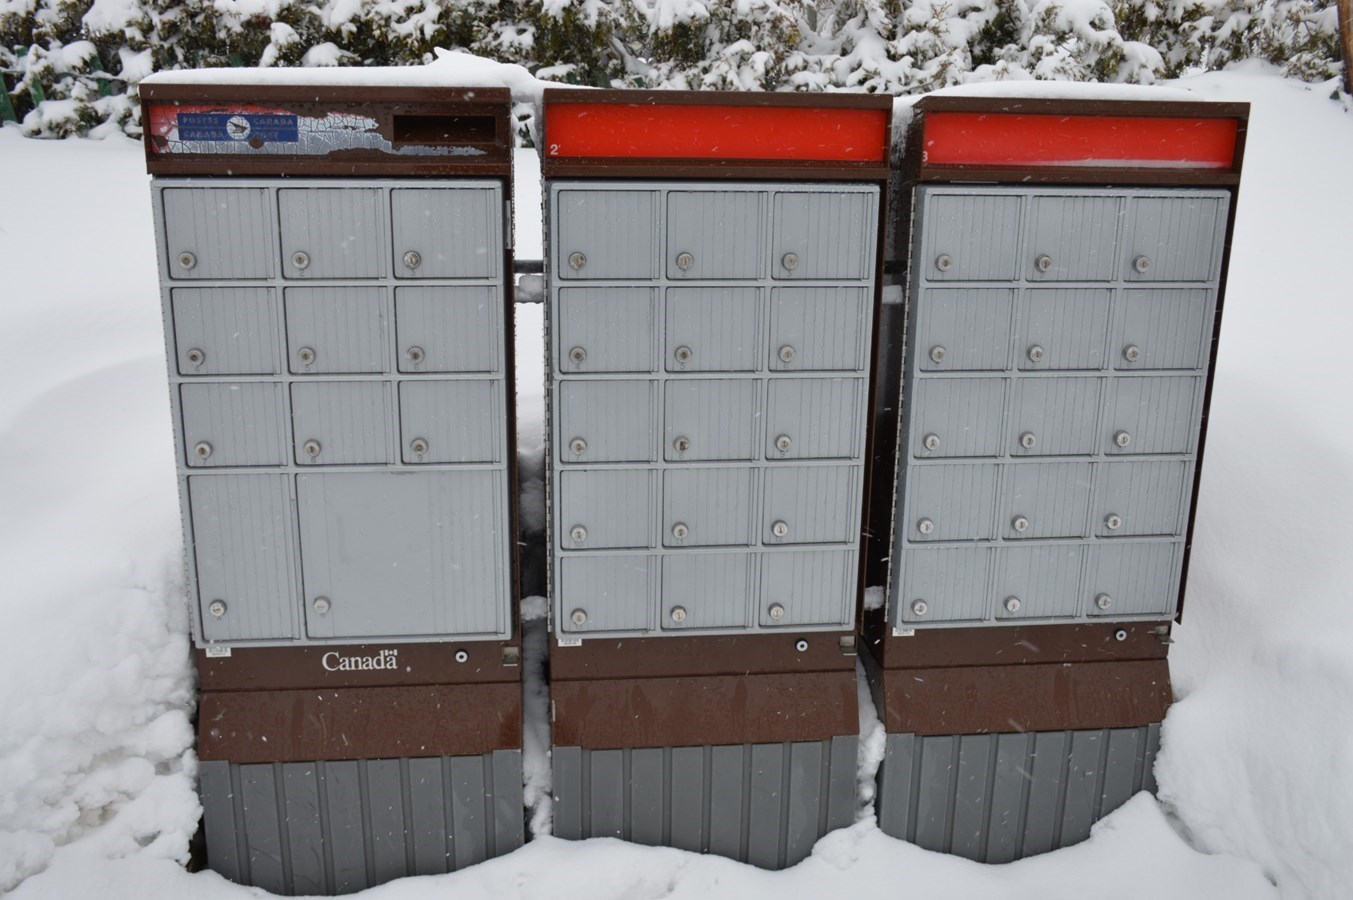 Some deliveries could be delayed, Canada Post warns